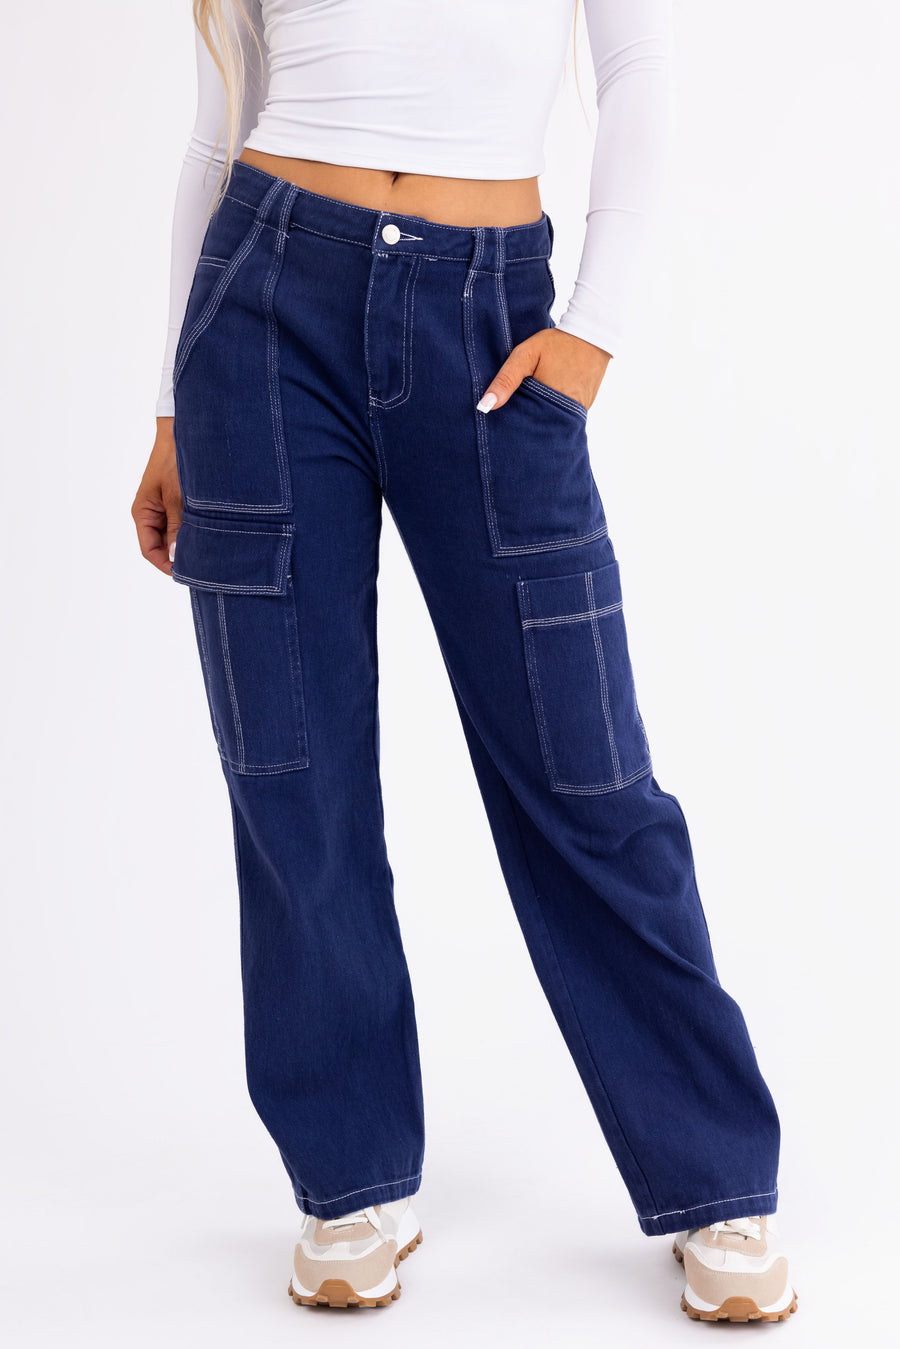 Navy Wide Leg Cargo Pants with White Stitching